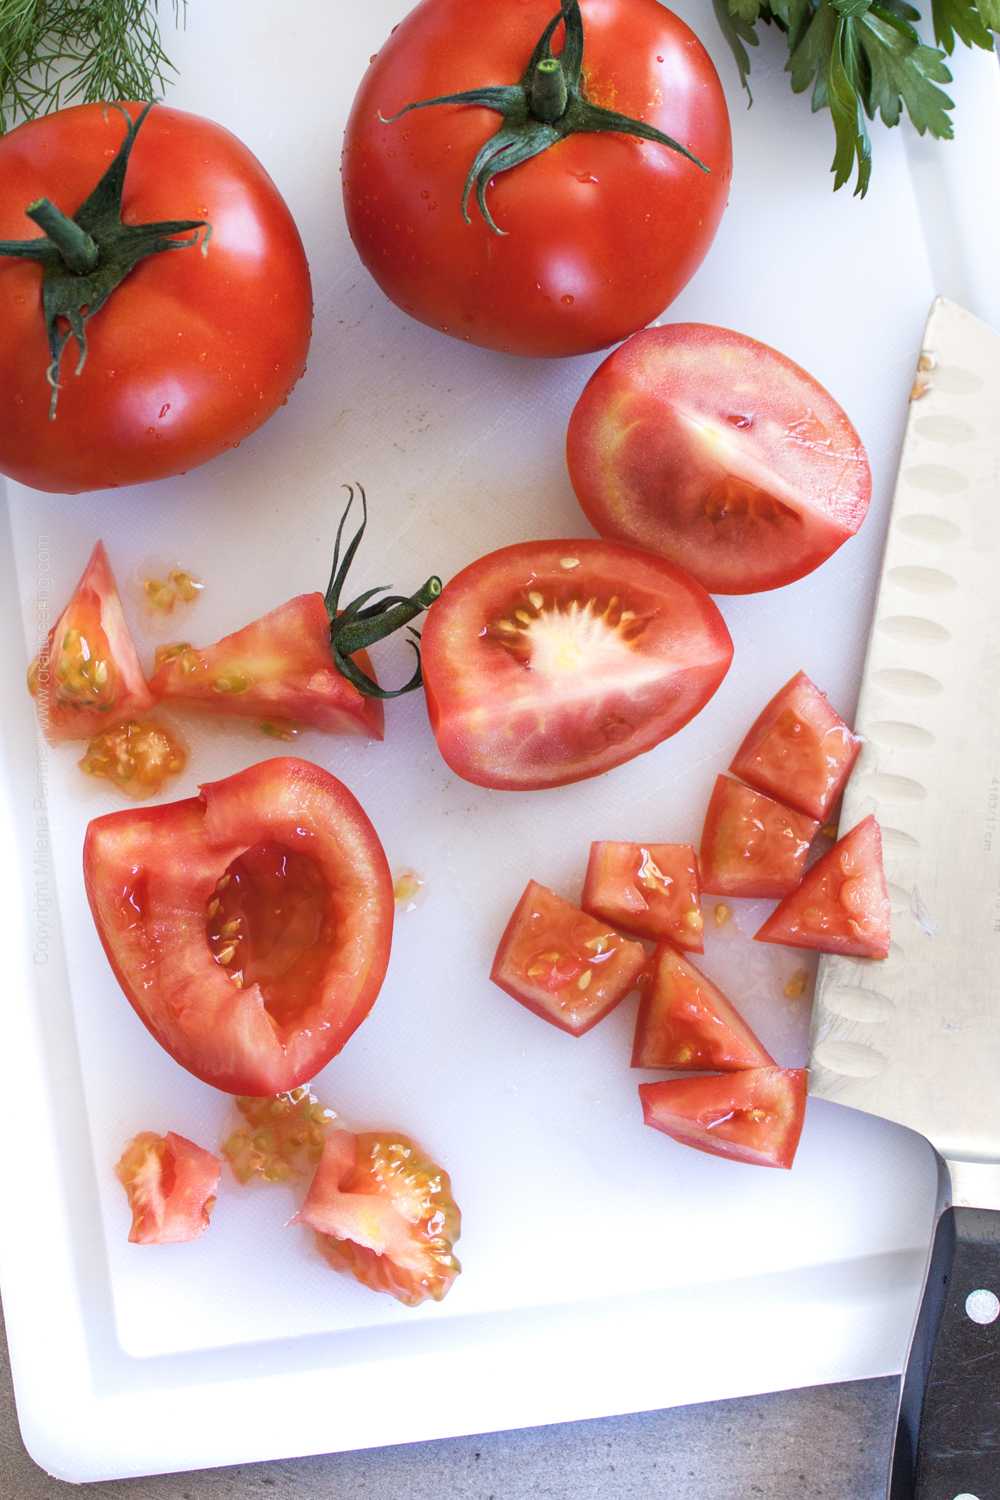 Tomato in various stages of cutting to demonstrate appropriate cut for Shopska salad. 